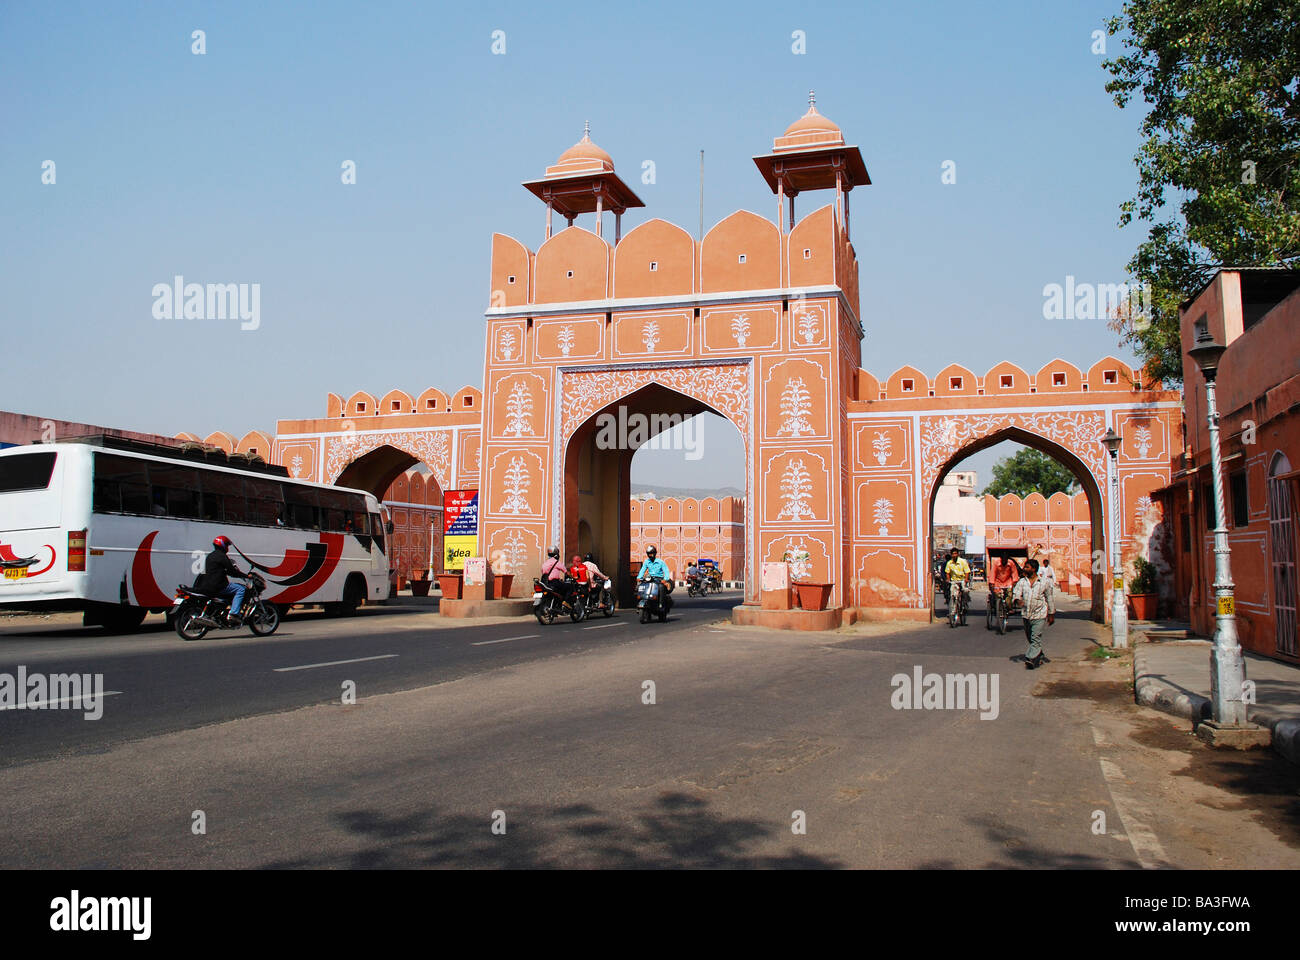 The picturesque city gate, one of the many gates of the city of Jaipur. The exterior is well adorned. Rajasthan State, India. Stock Photo